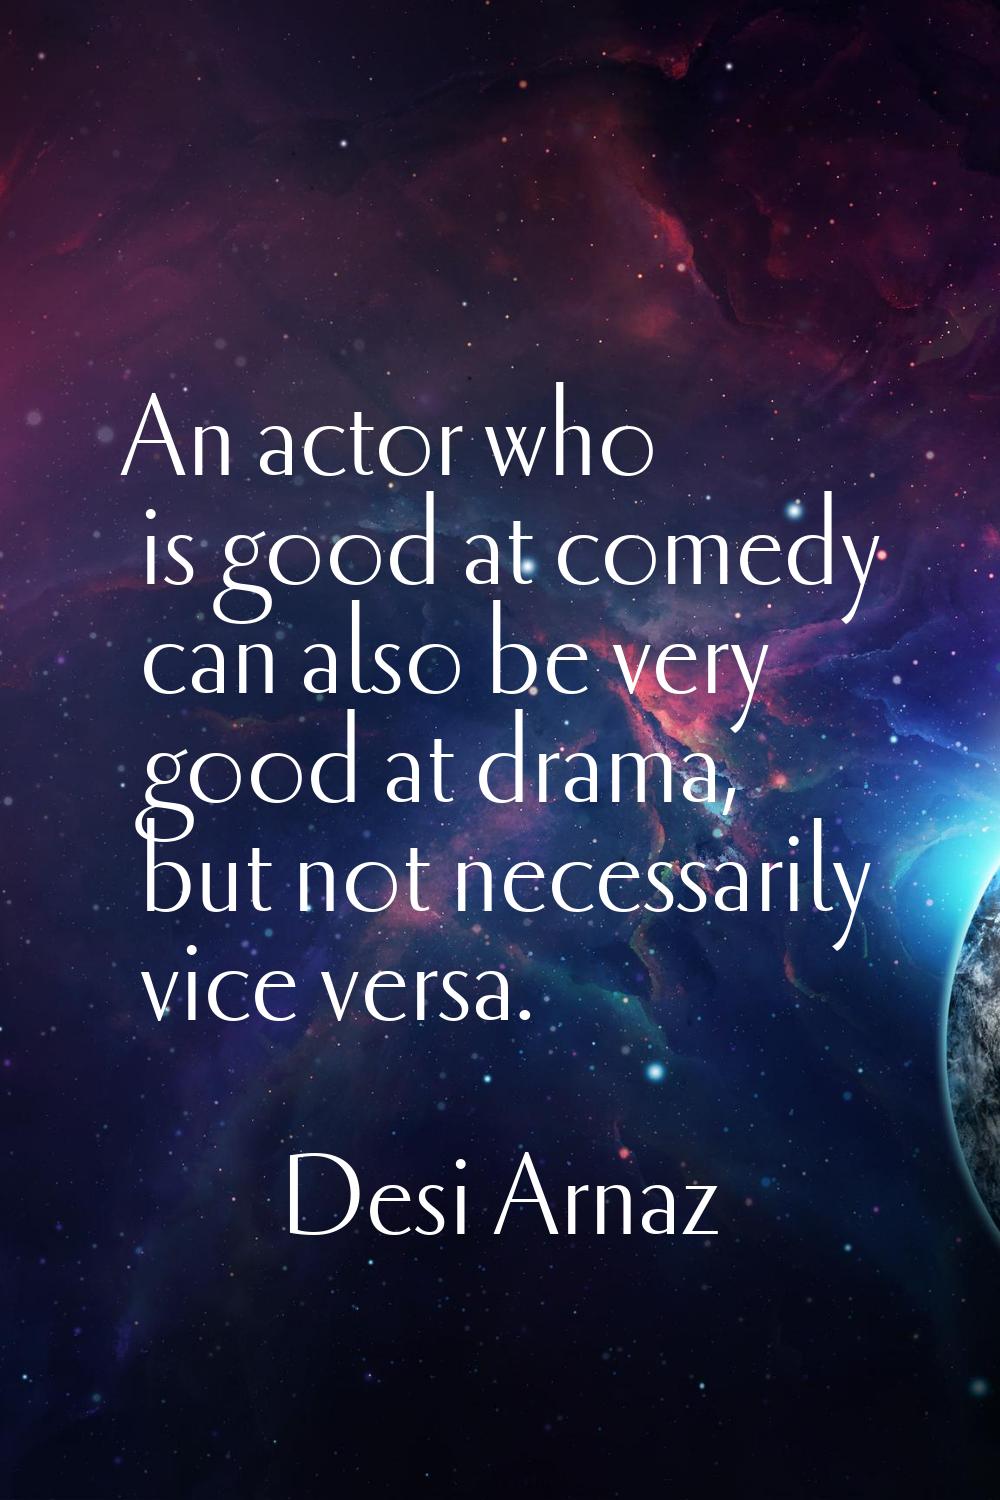 An actor who is good at comedy can also be very good at drama, but not necessarily vice versa.